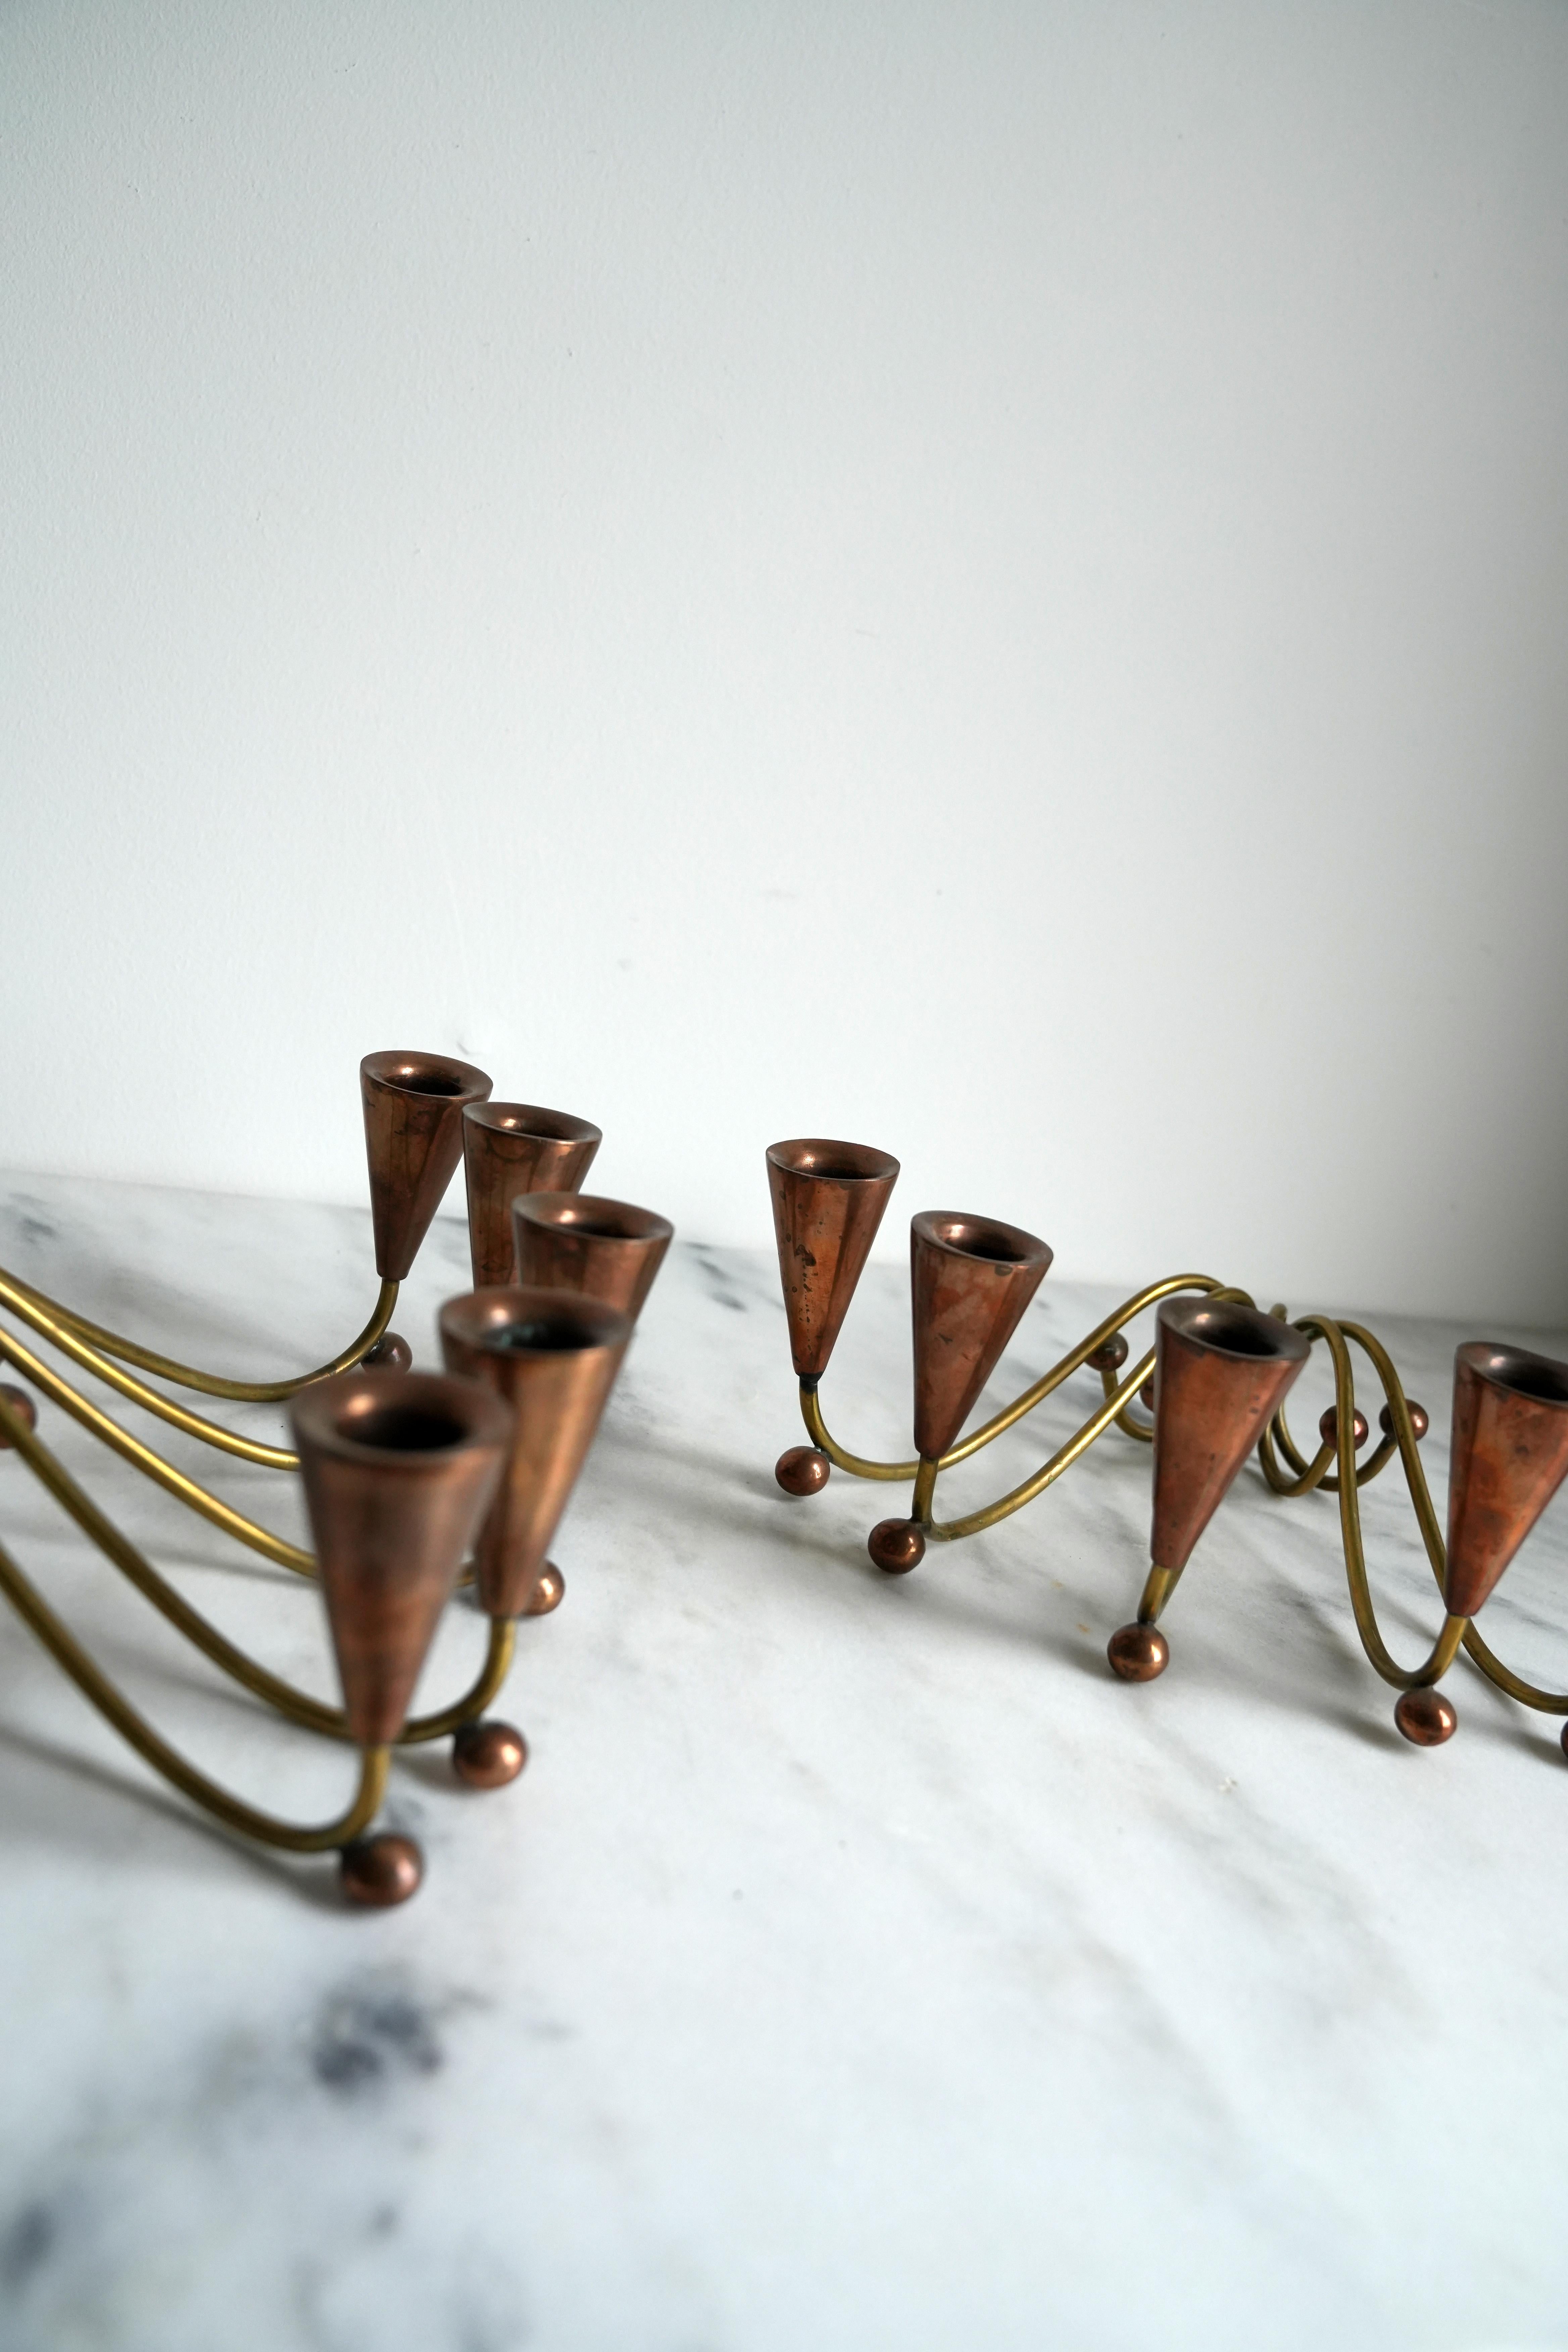 20th Century Modernist Copper and Brass Candlesticks